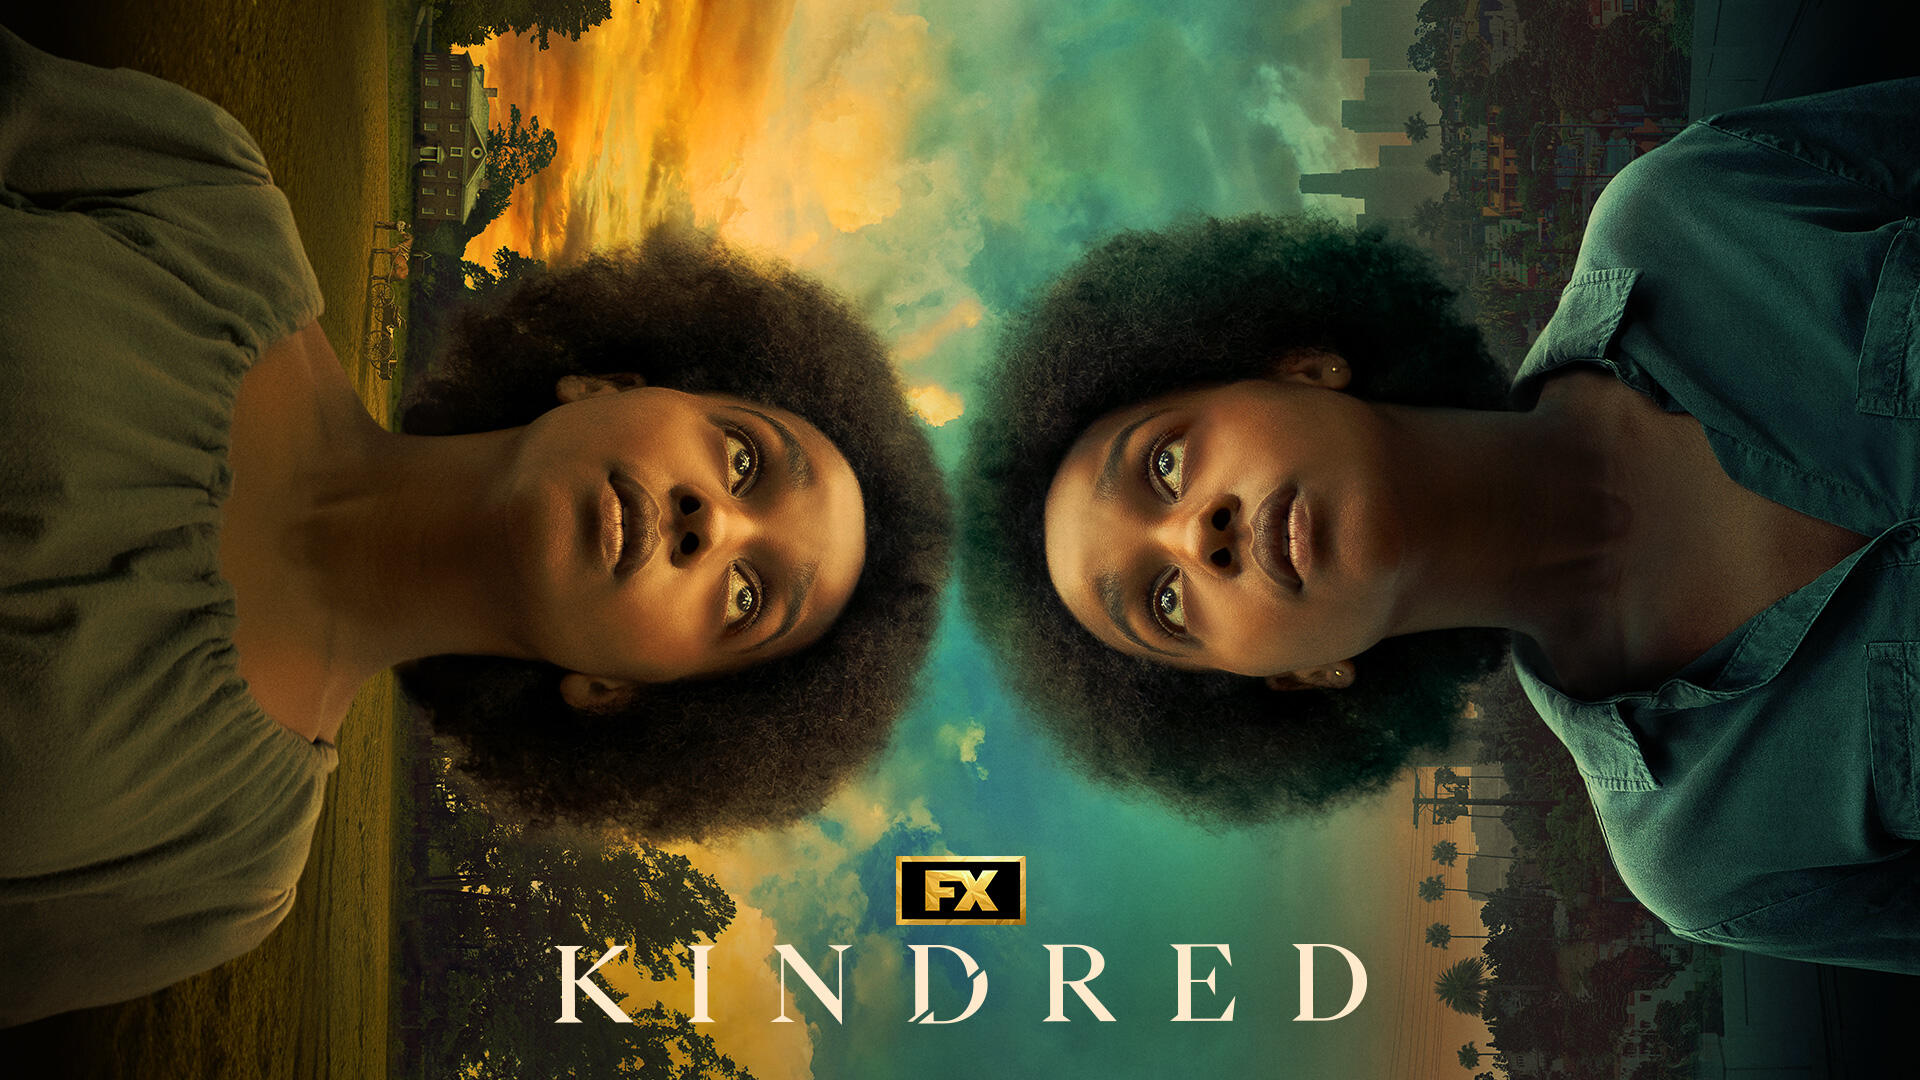 Kindred -- Adapted from the celebrated novel Kindred, by Hugo Award-winner Octavia E. Butler, the FX series centers on “Dana James” (Mallori Johnson), a young Black woman and aspiring writer who has uprooted her life of familial obligation and relocated to Los Angeles, ready to claim a future that, for once, feels all her own. But, before she can settle into her new home, she finds herself being violently pulled back and forth in time. She emerges at a nineteenth-century plantation, a place remarkably and intimately linked with Dana and her family. An interracial romance threads through Dana’s past and present, and the clock is ticking as she struggles to confront secrets she never knew ran through her blood, in this genre-breaking exploration of the ties that bind. (Courtesy of FX)